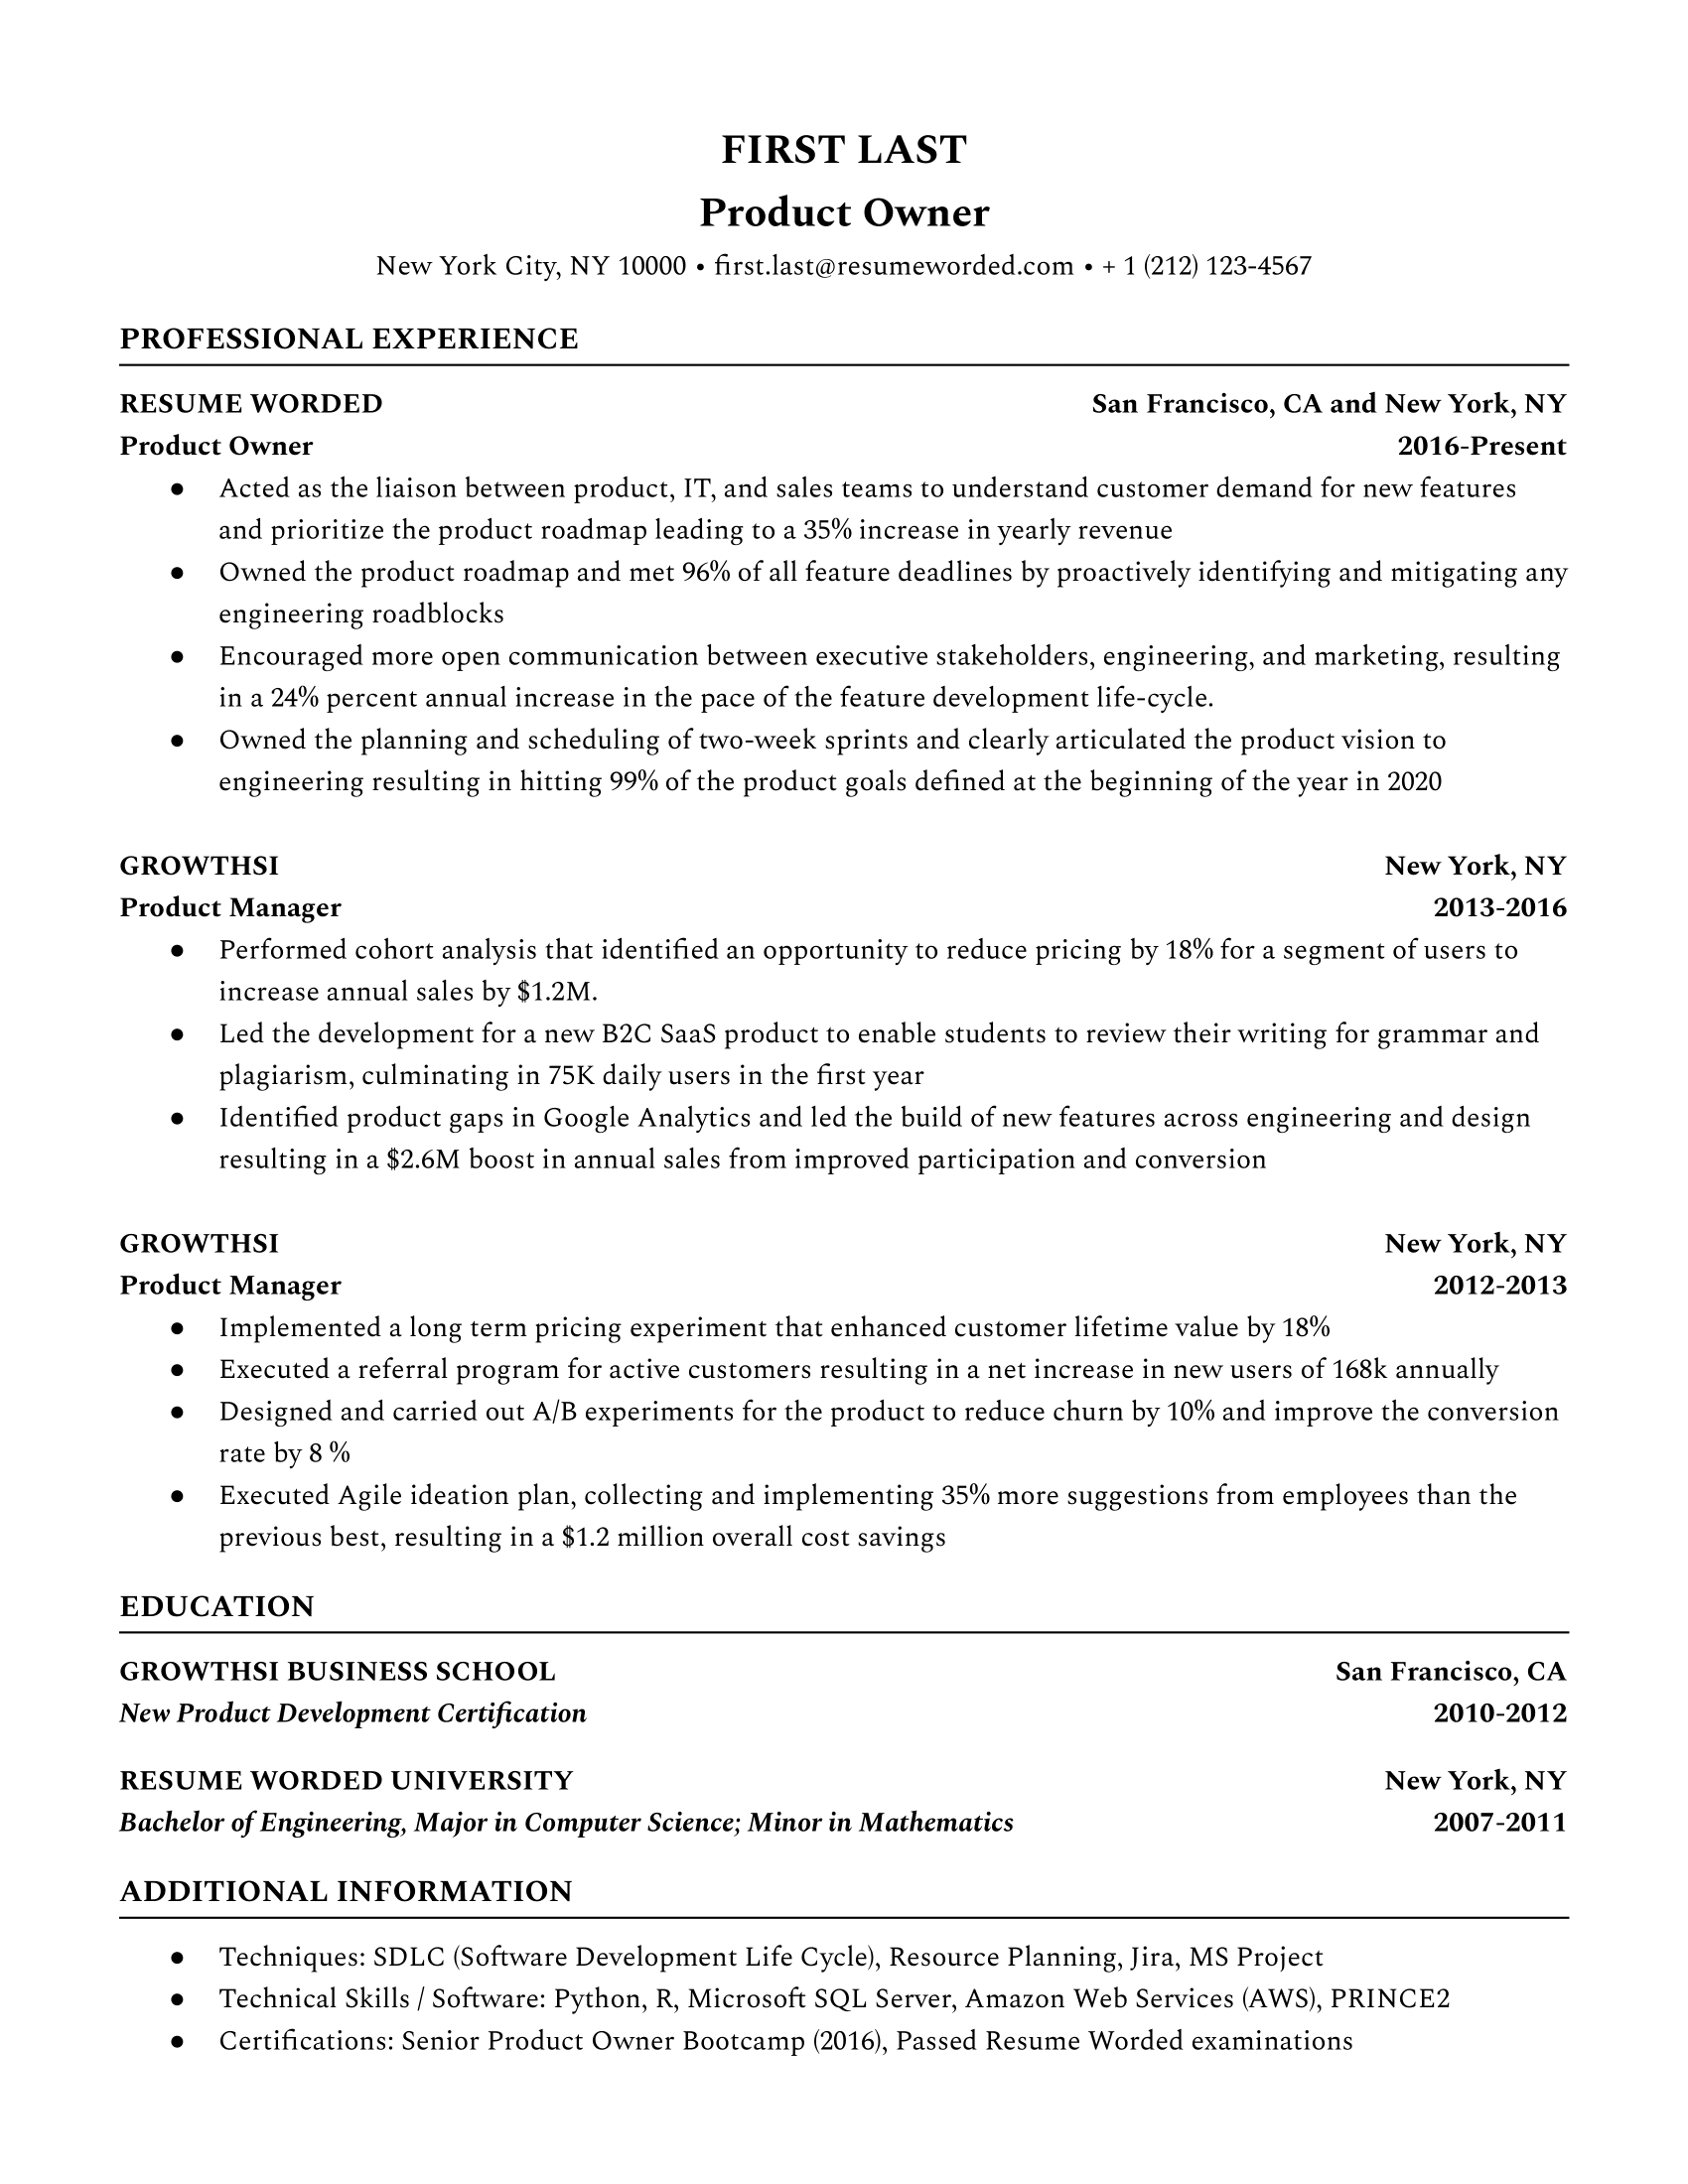 Highlight relevant experience with data and business intelligence - Data Warehouse Engineer Resume